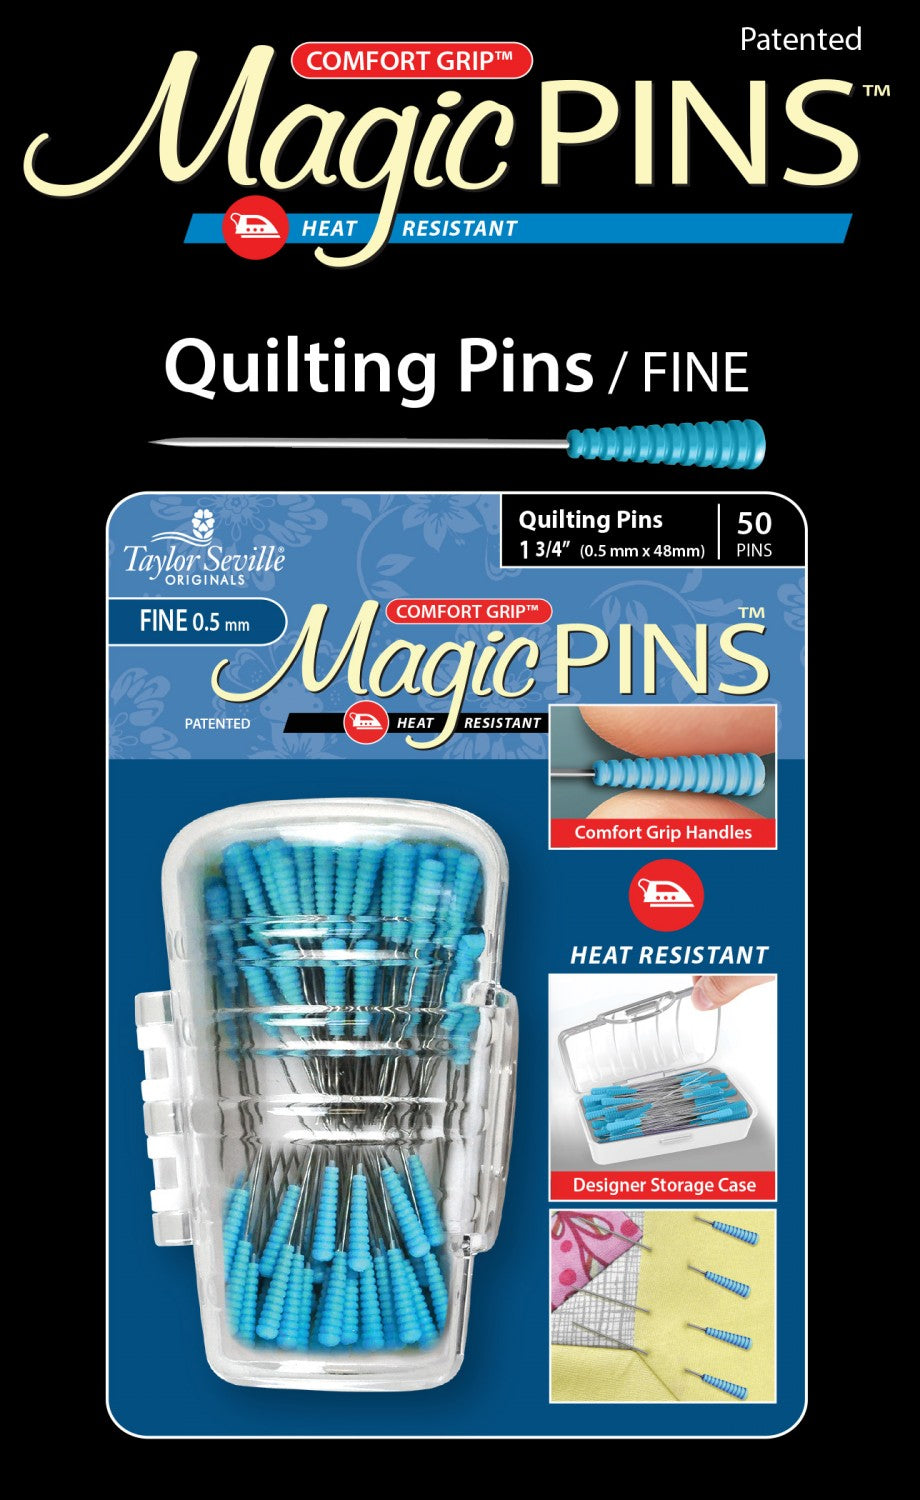 Magic Pins by Taylor Seville - Quilting Pins Fine  (0.5mm x 48mm)